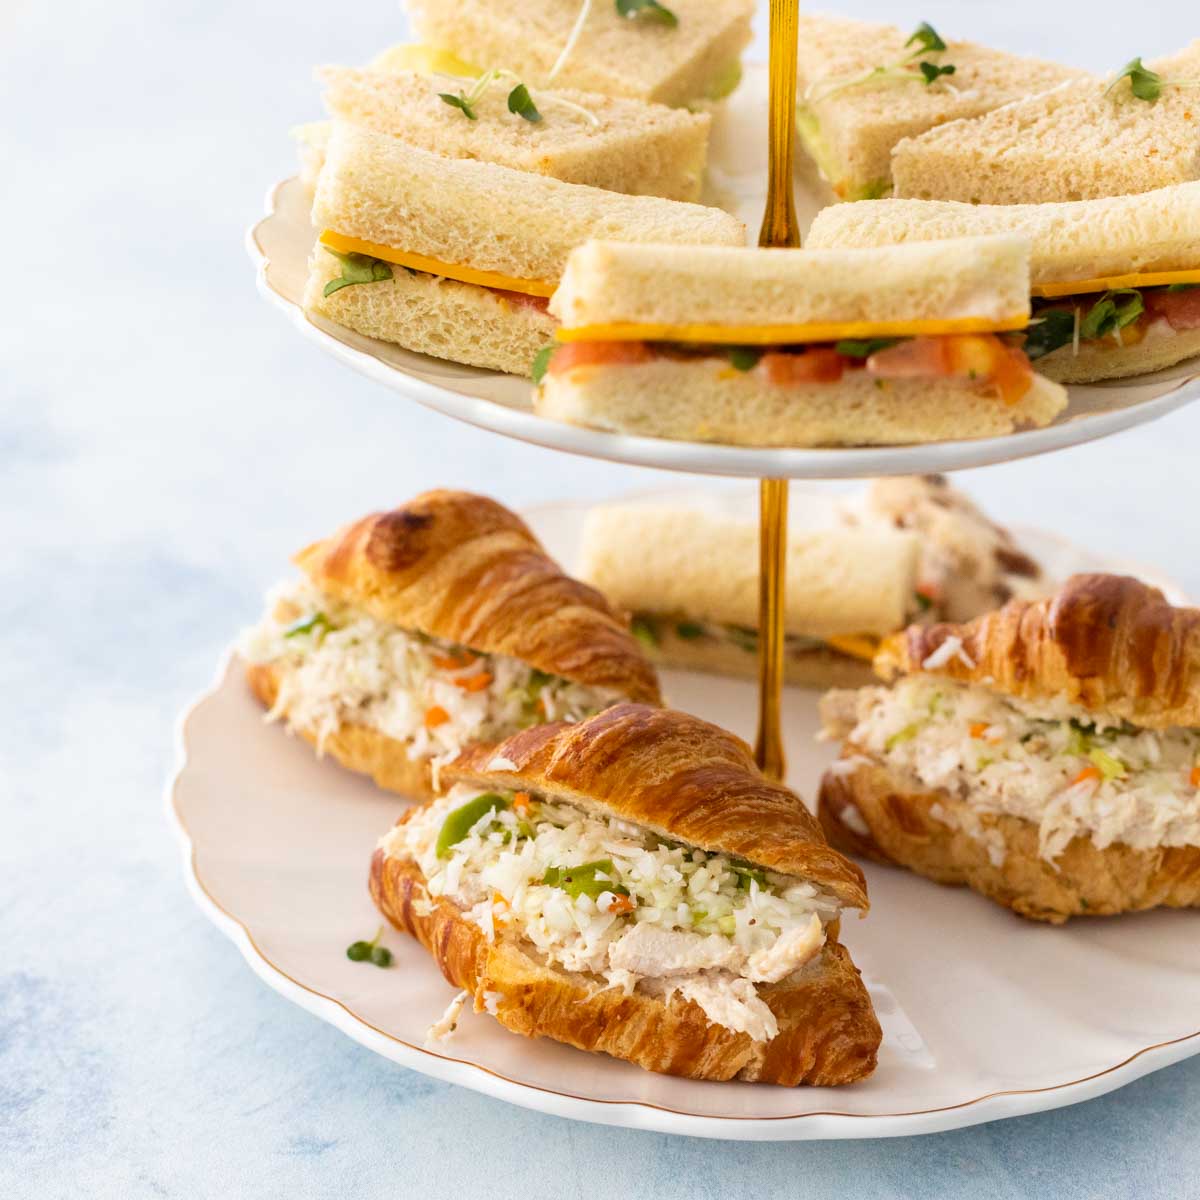 A tiered sandwich tray has several finger sandwiches on display.